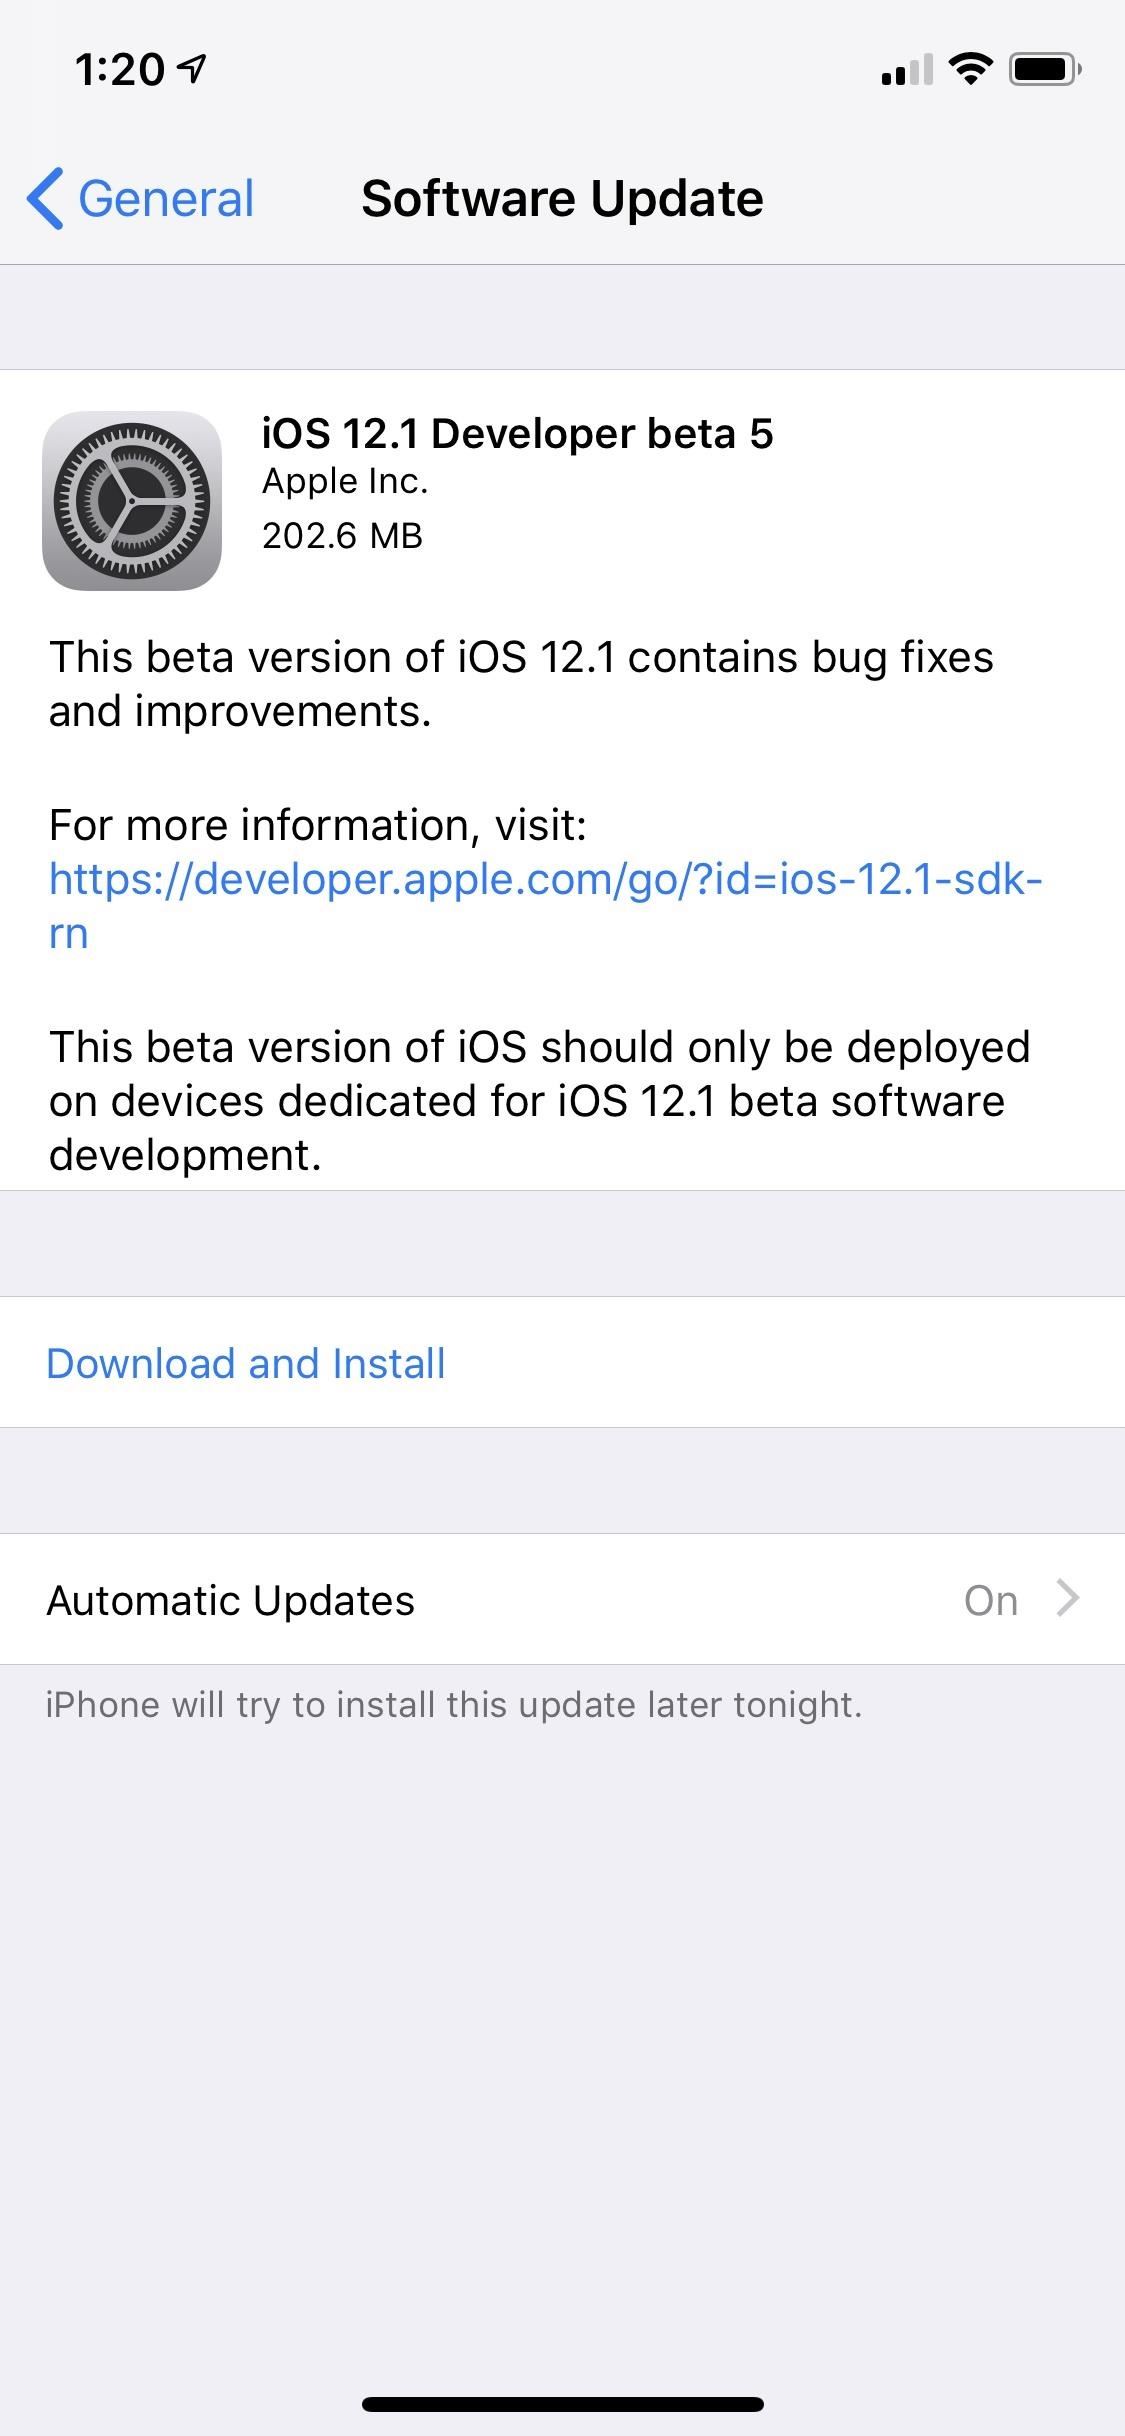 Apple Releases iOS 12.1 Beta 5 to Developers